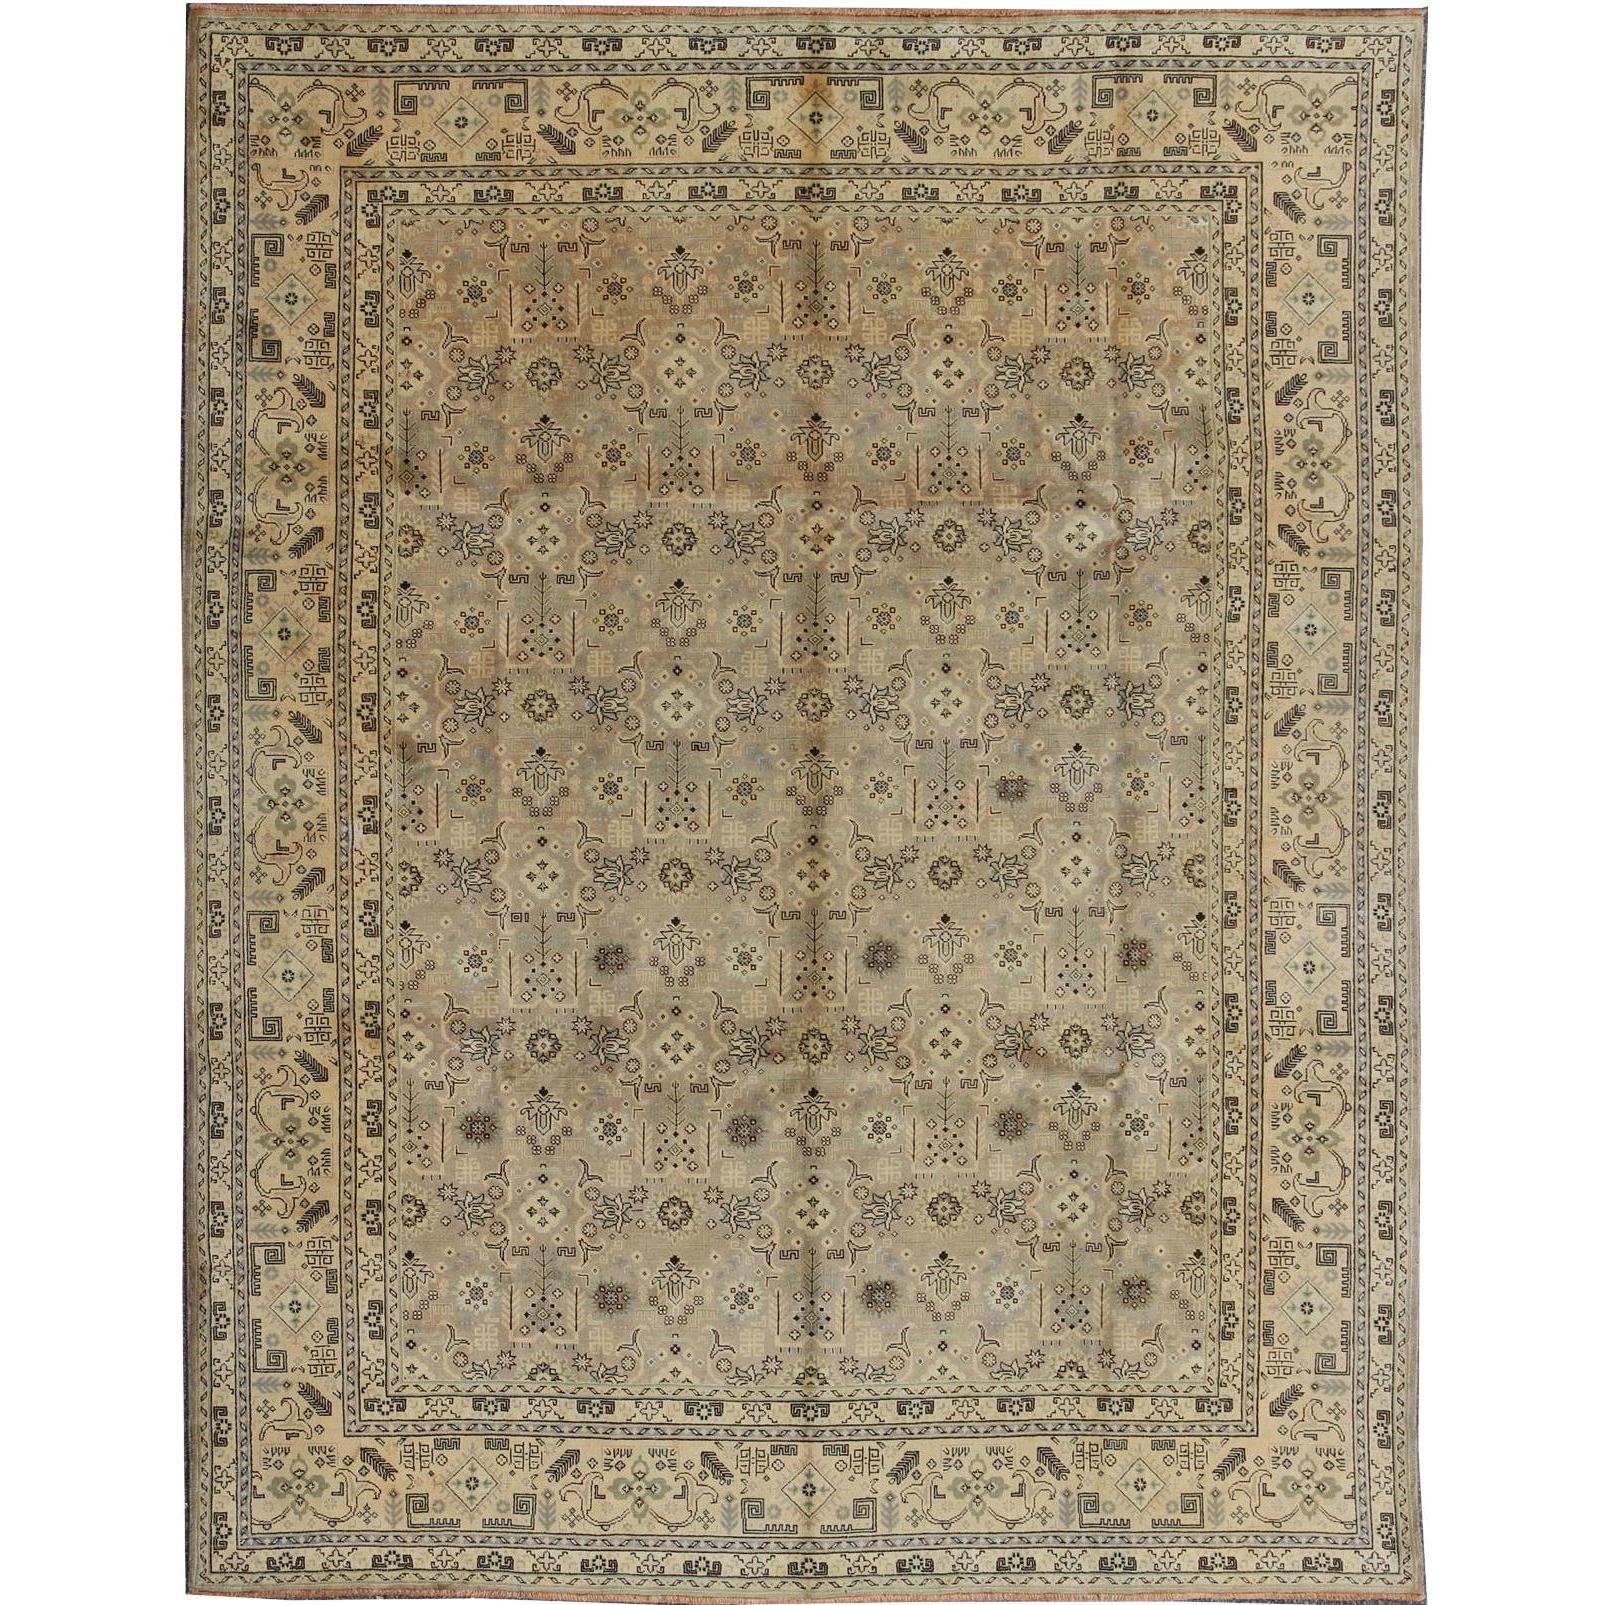 Vintage Persian Tabriz Rug with all over design in light colors For Sale